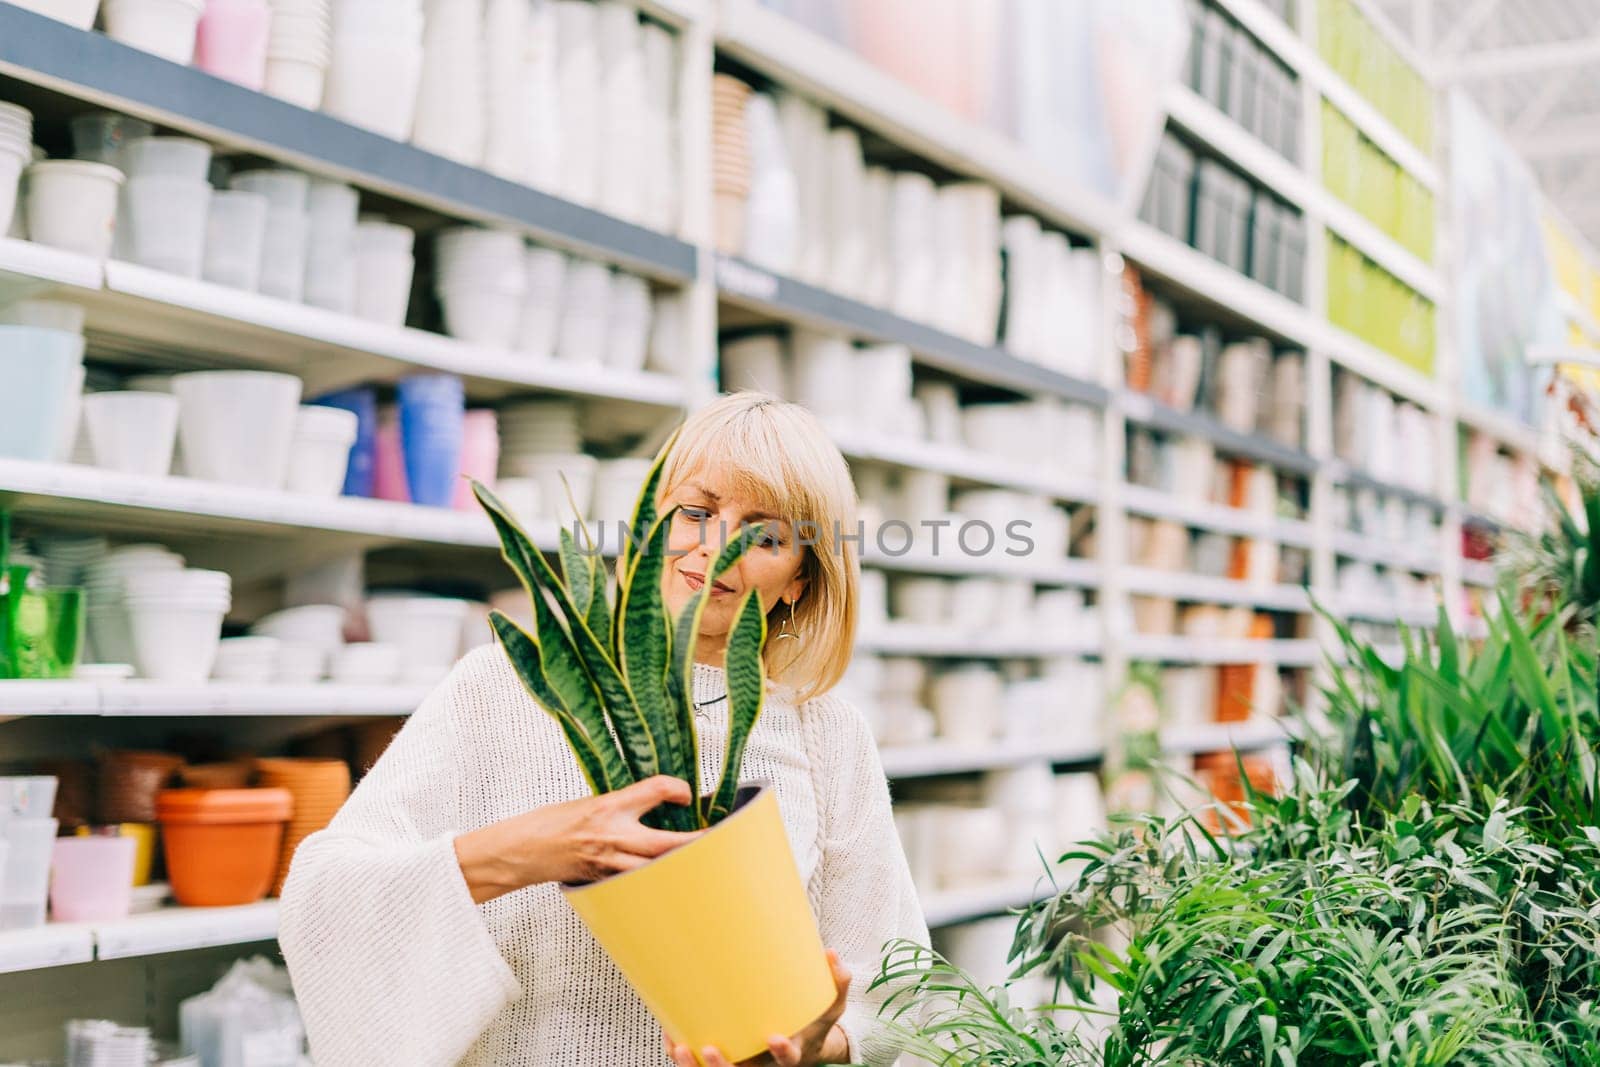 Gardening, planting and shopping concept. Beautiful mature adult woman choosing houseplants and pots in greenhouse or garden centre. Senior buying flowers plants at market store in mall.